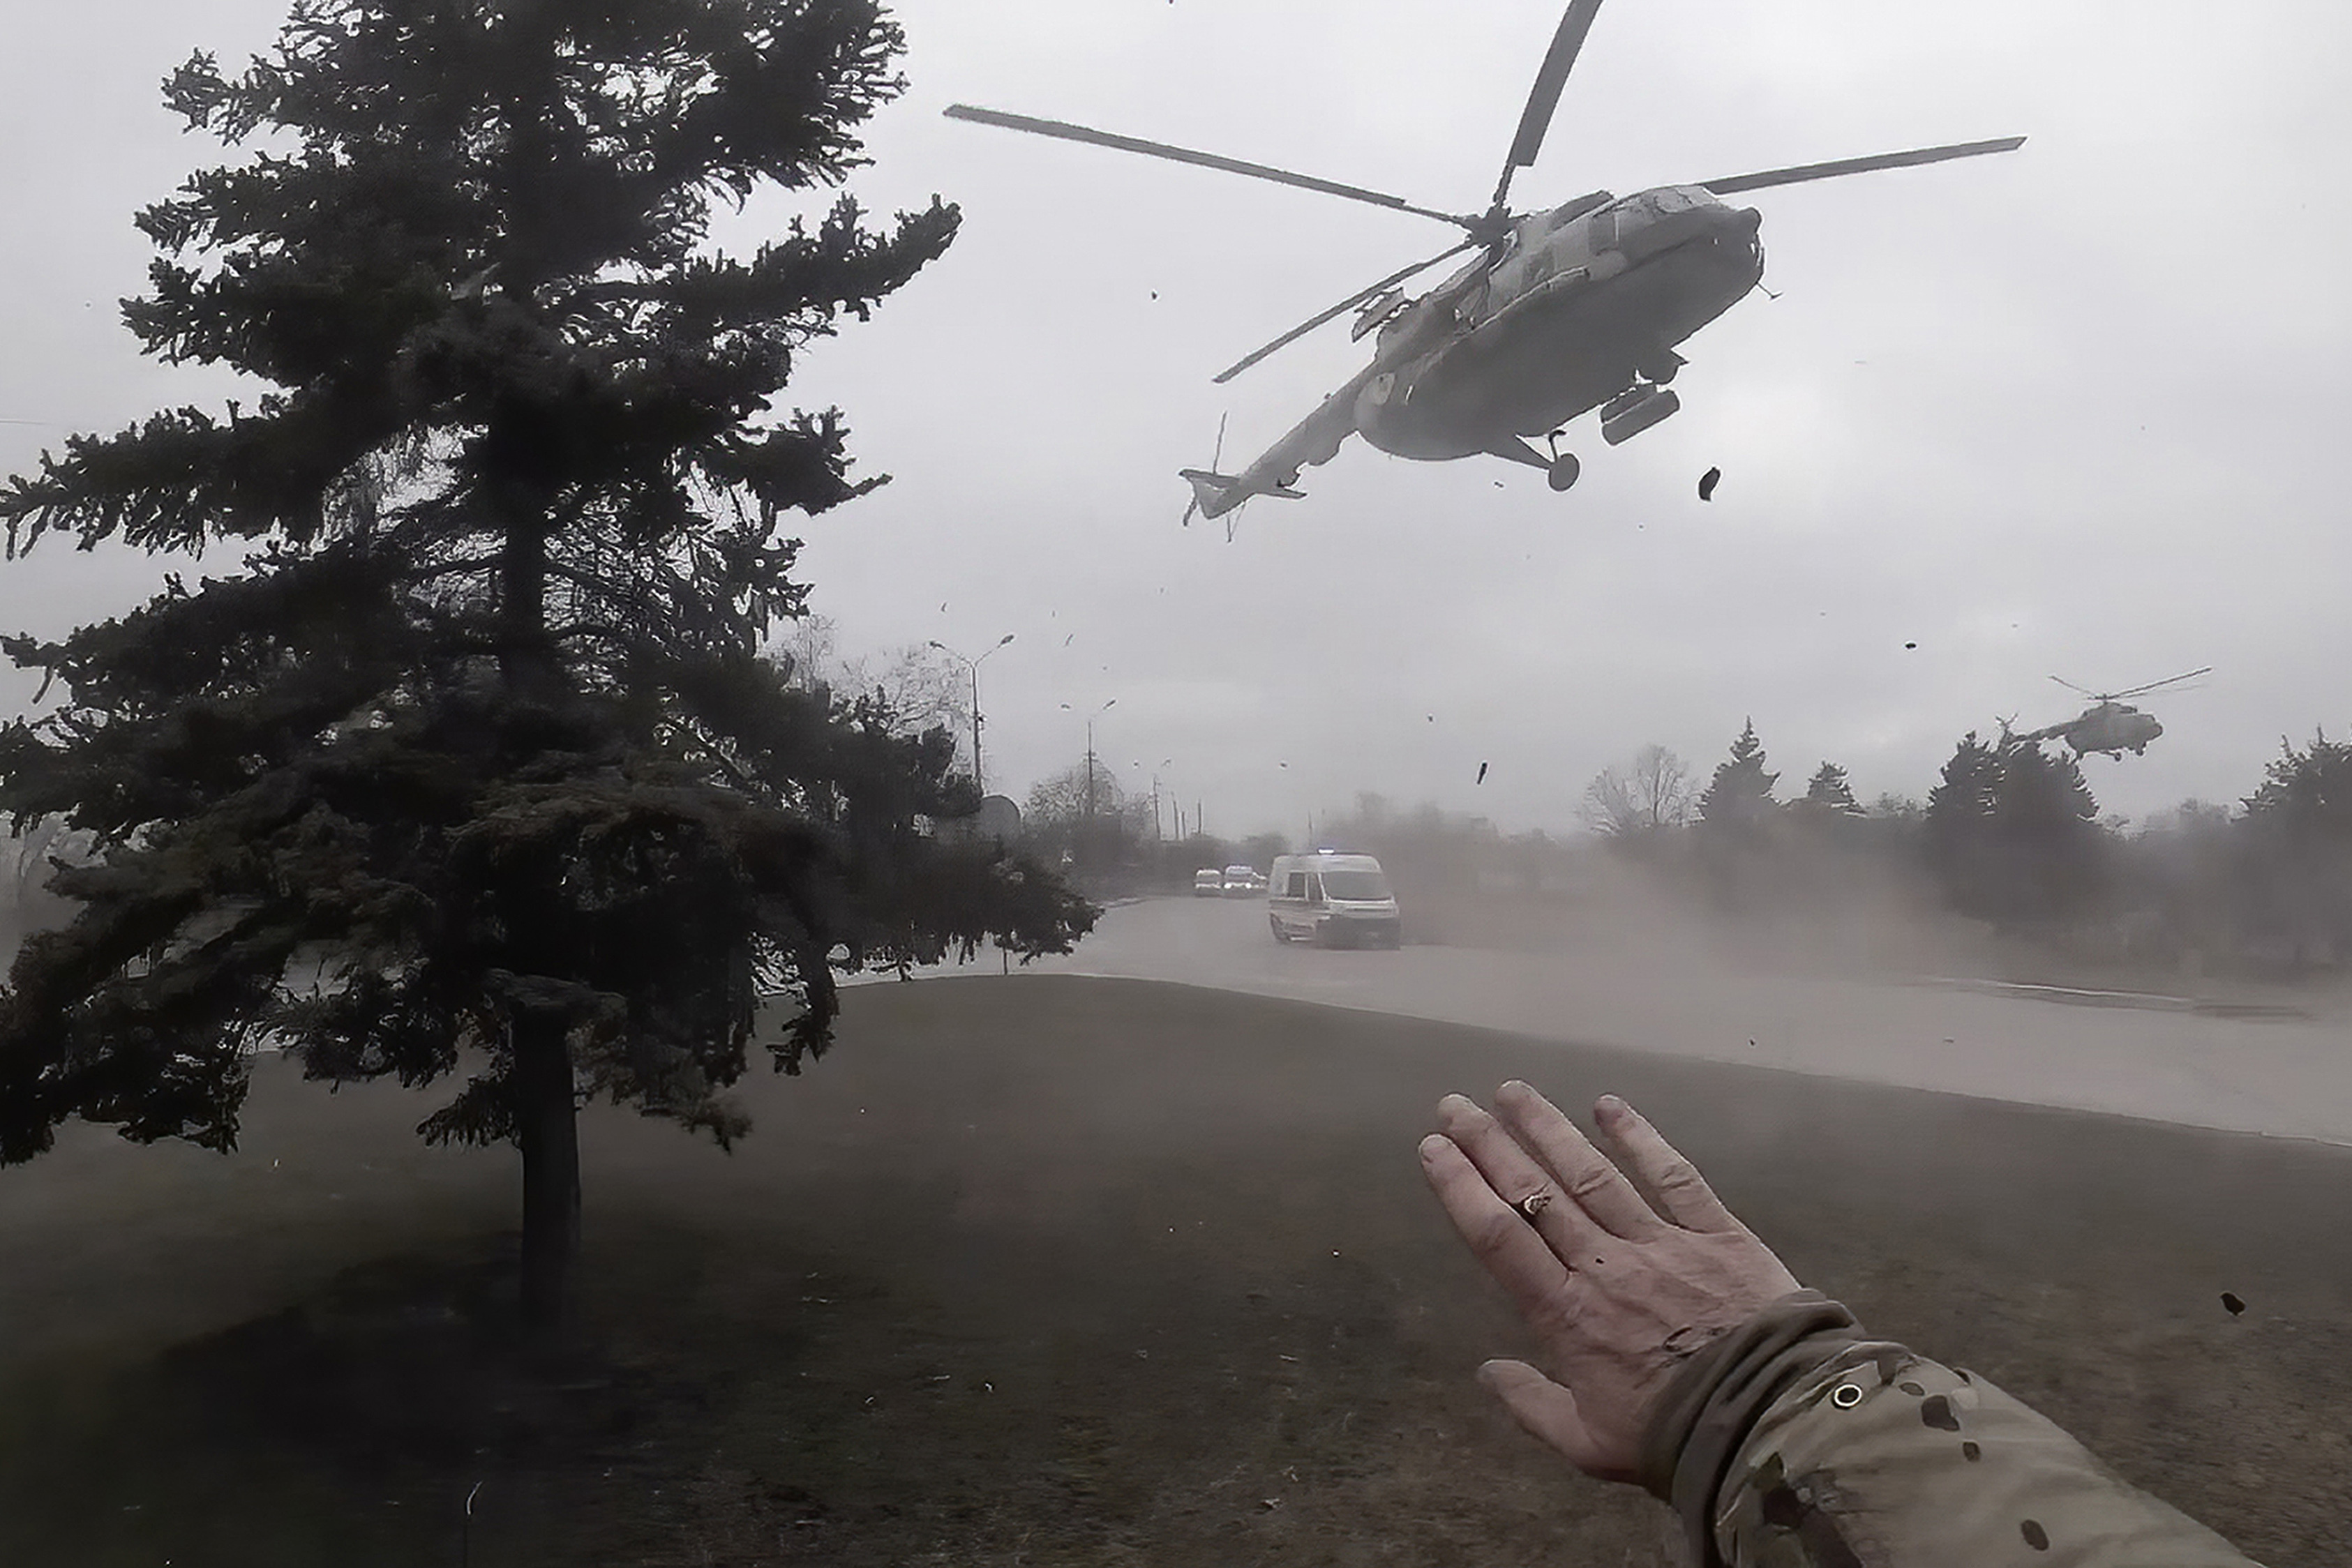 A Ukrainian medical evacuation helicopter lands in front of Yuliia Paievska, known as Taira, in Mariupol, Ukraine, on February 27